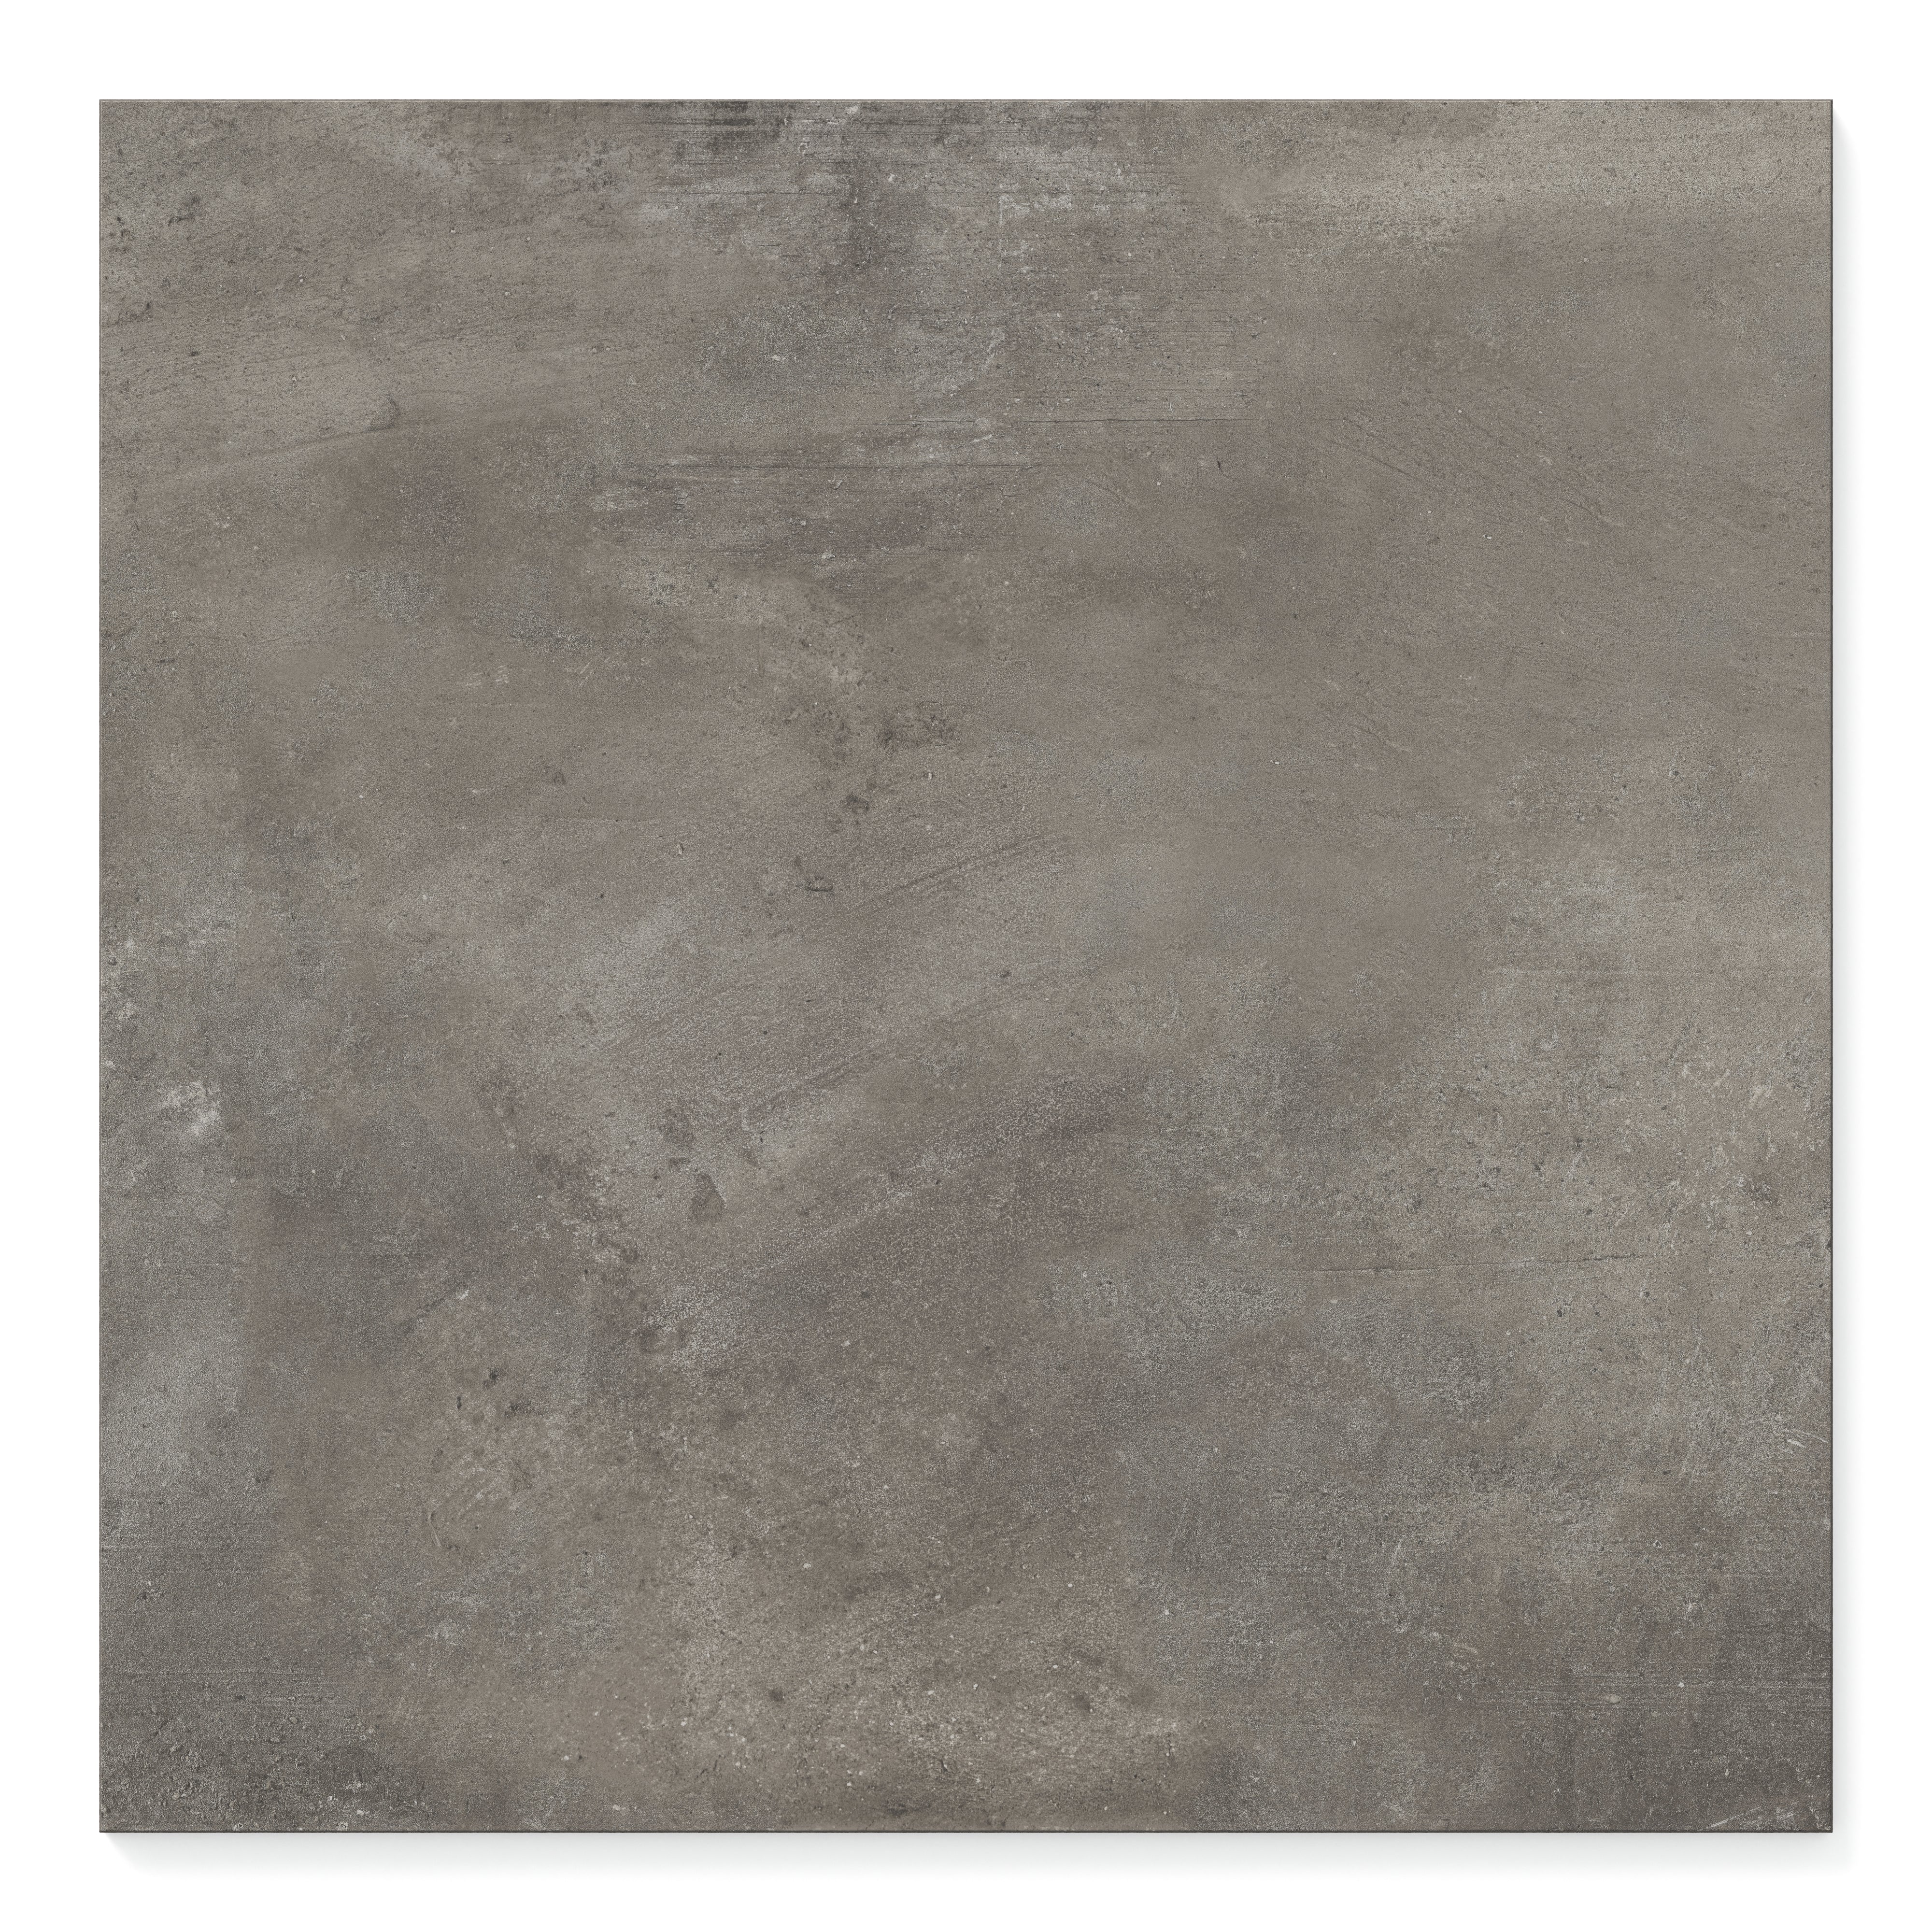 Elegant and modern, this large format Ramsey 24x24 Matte Porcelain Tile in Smoke exemplifies urban sophistication with its rich, deep gray hue and concrete look. The smooth matte finish complements a variety of design aesthetics, making it a versatile choice for enhancing the floors and walls of contemporary residential or commercial spaces.